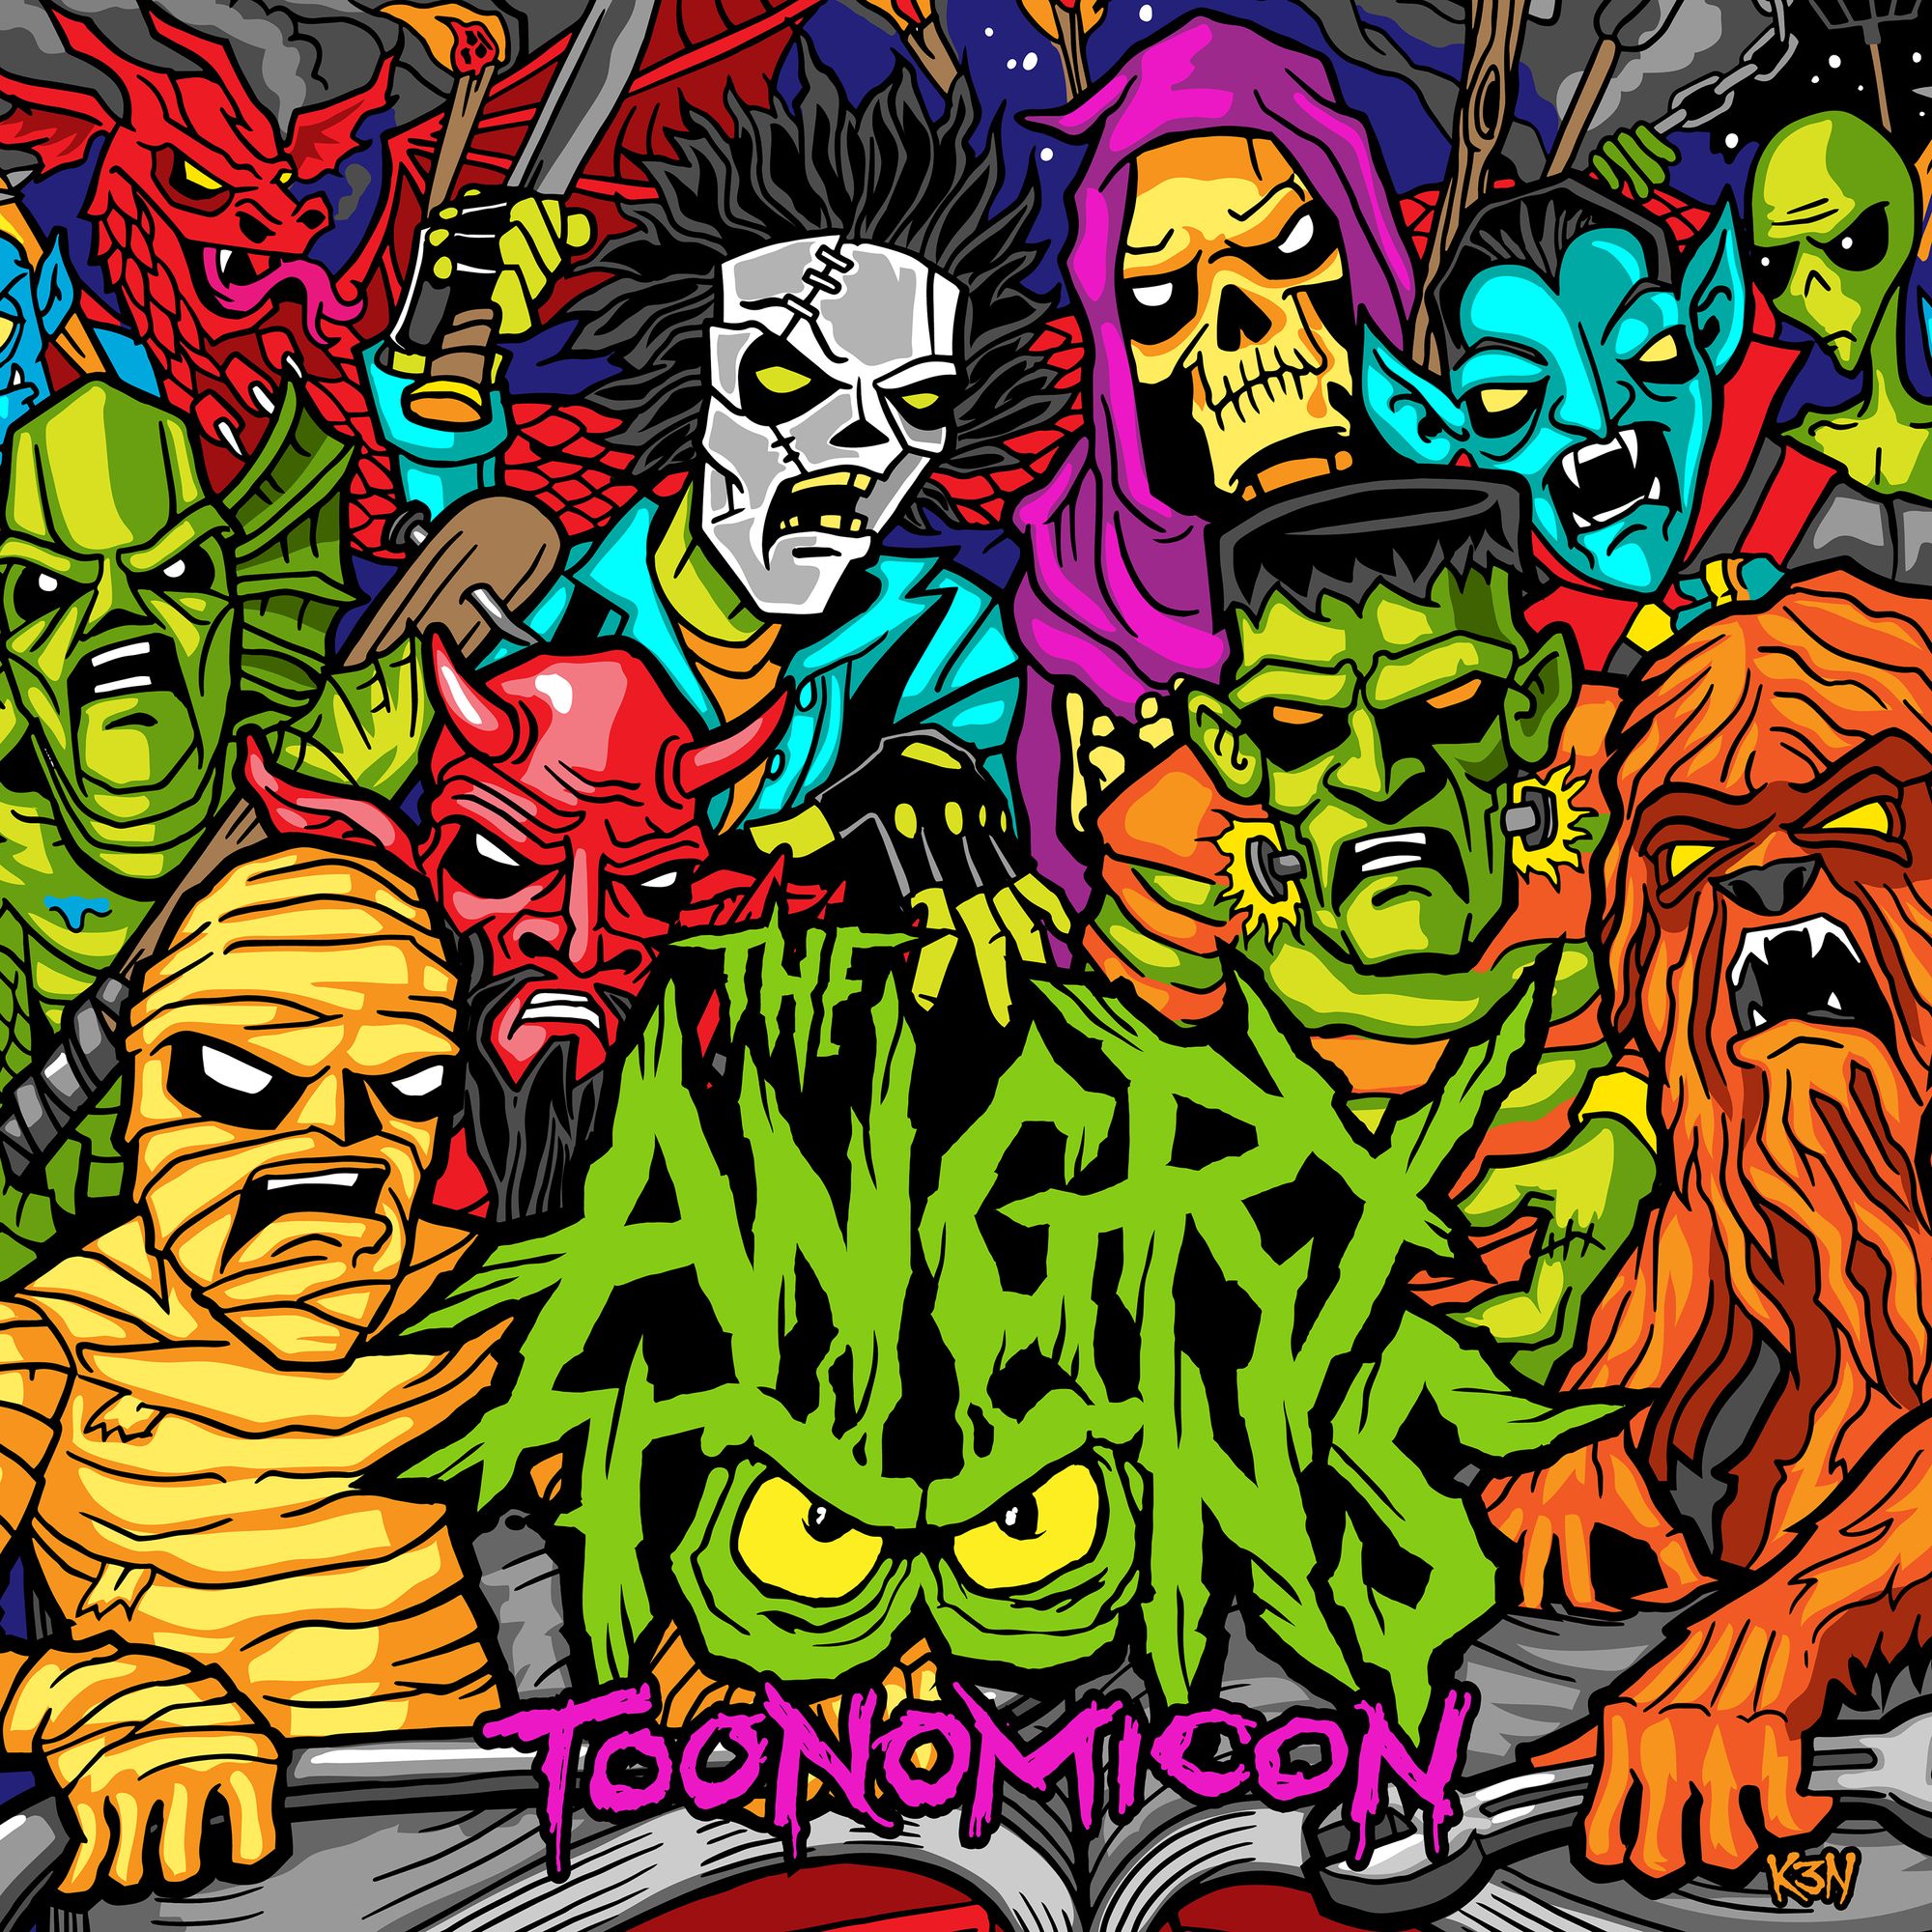 Album Review | "Toonomicon" - The Angry Toons